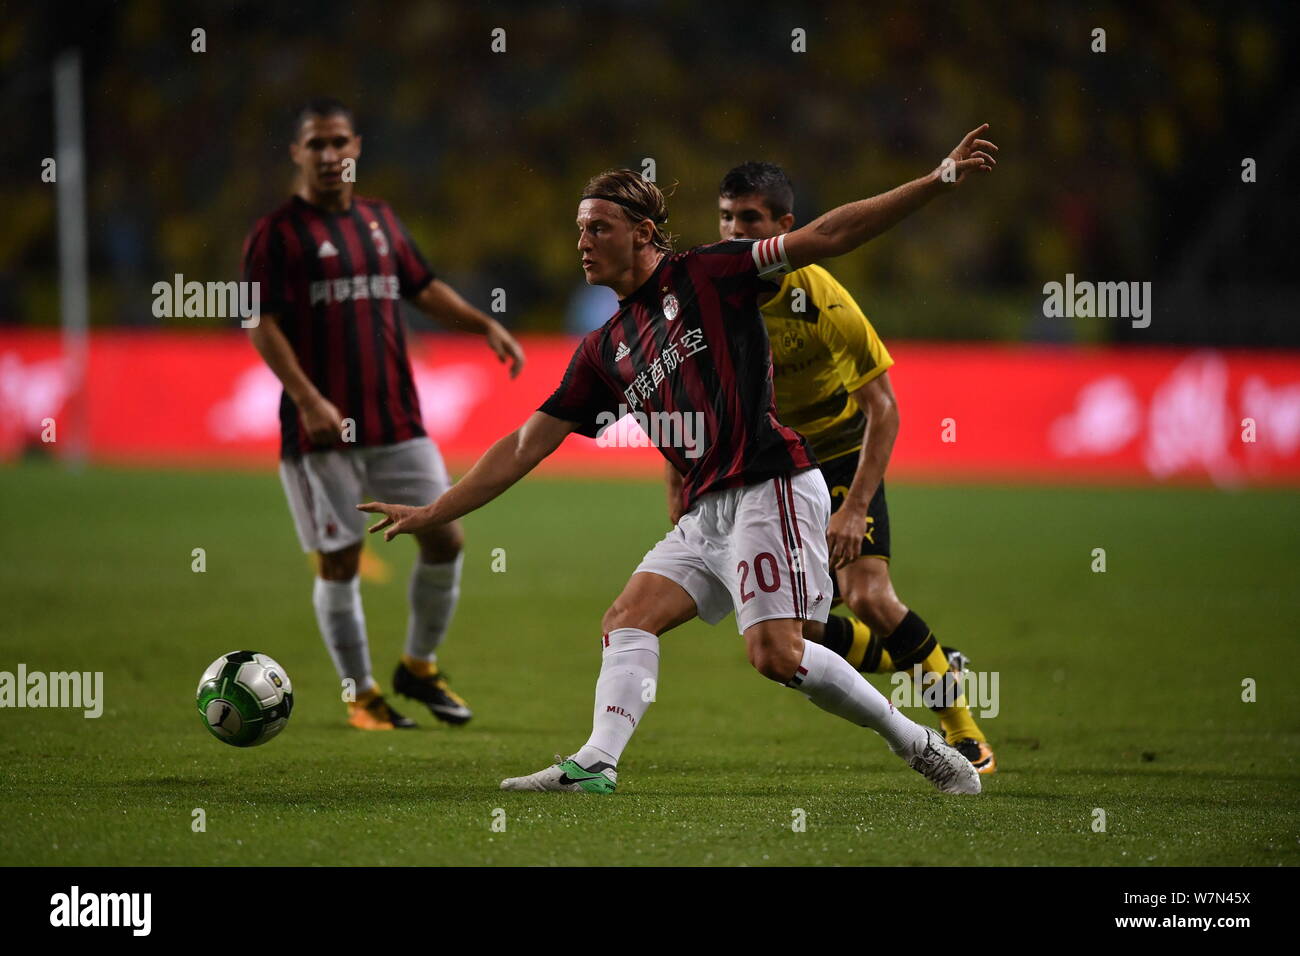 Italian football player Ignazio Abate, front, of AC Milan,  challenges a player of Borussia Dortmund during the Guangzhou match of the 2017 Internatio Stock Photo